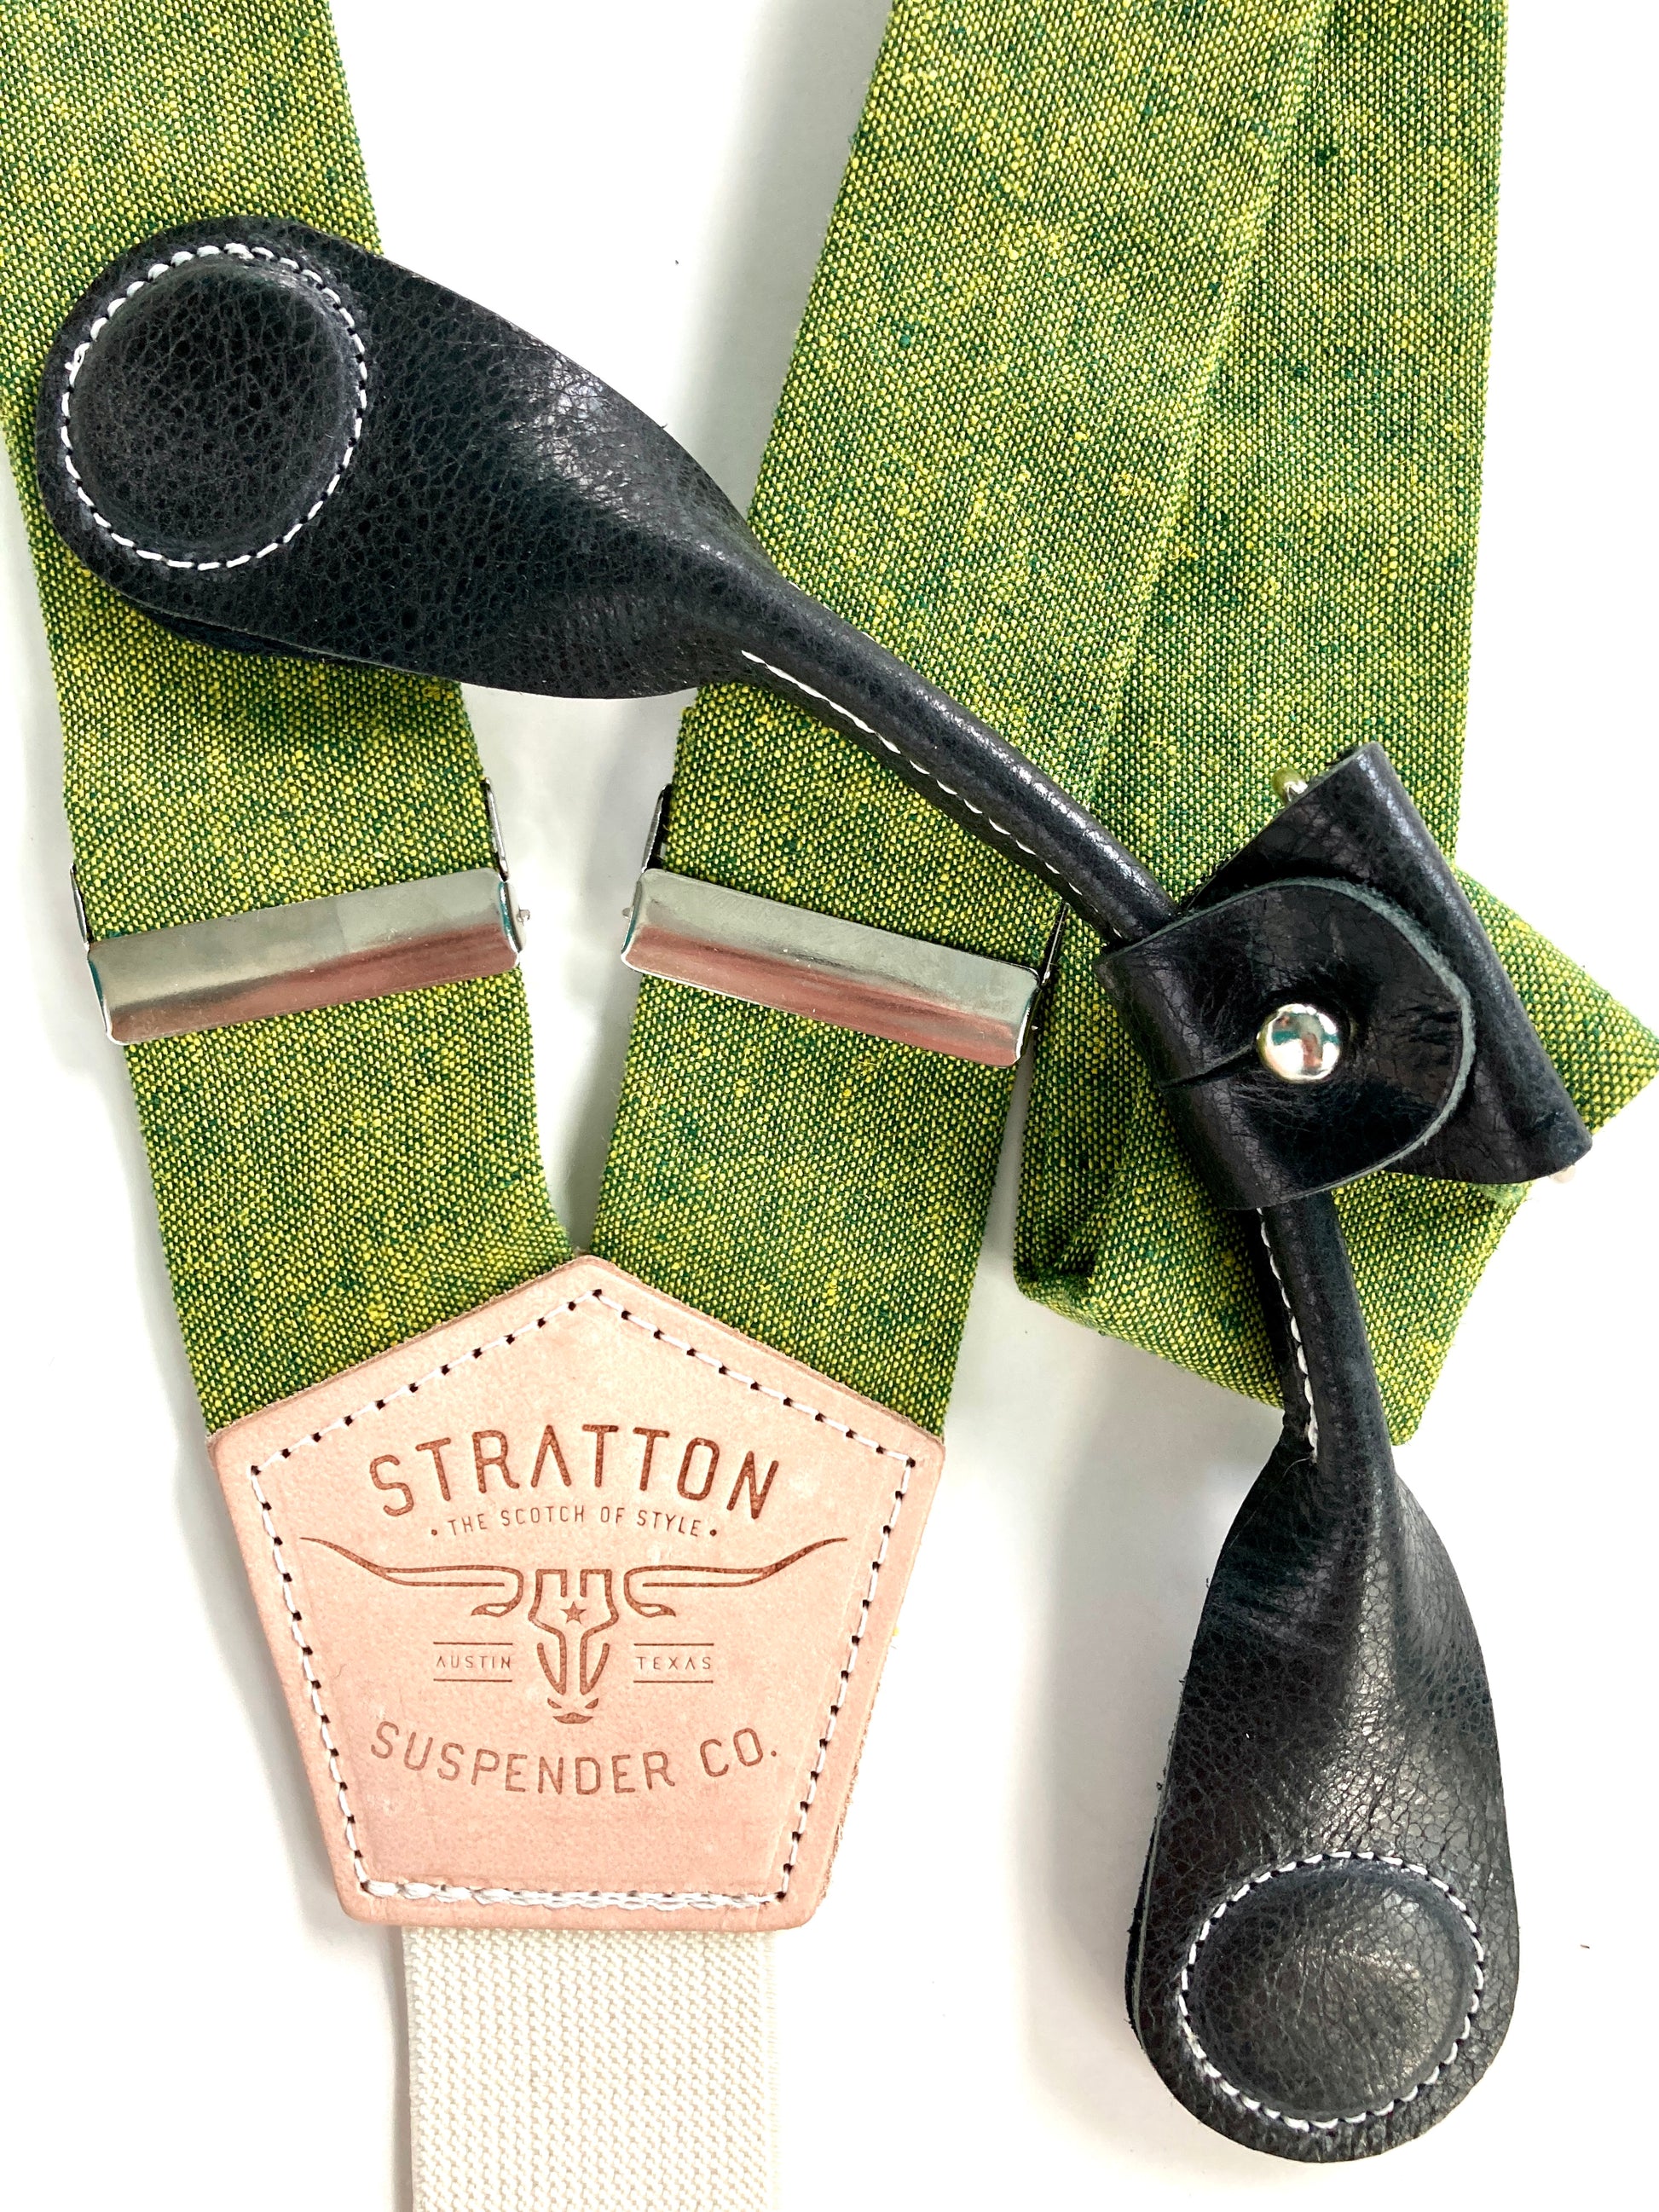 Stratton Suspender Co. features the Palm green with yellow woven threaded linen suspenders on veg tan shoulder leather with cream colored elastic back strap for the Fall 2022 suspenders collection Magnetic Stratton Suspender clasps in Black Pontedero Italian leather hand-picked by Stratton Suspender Co.